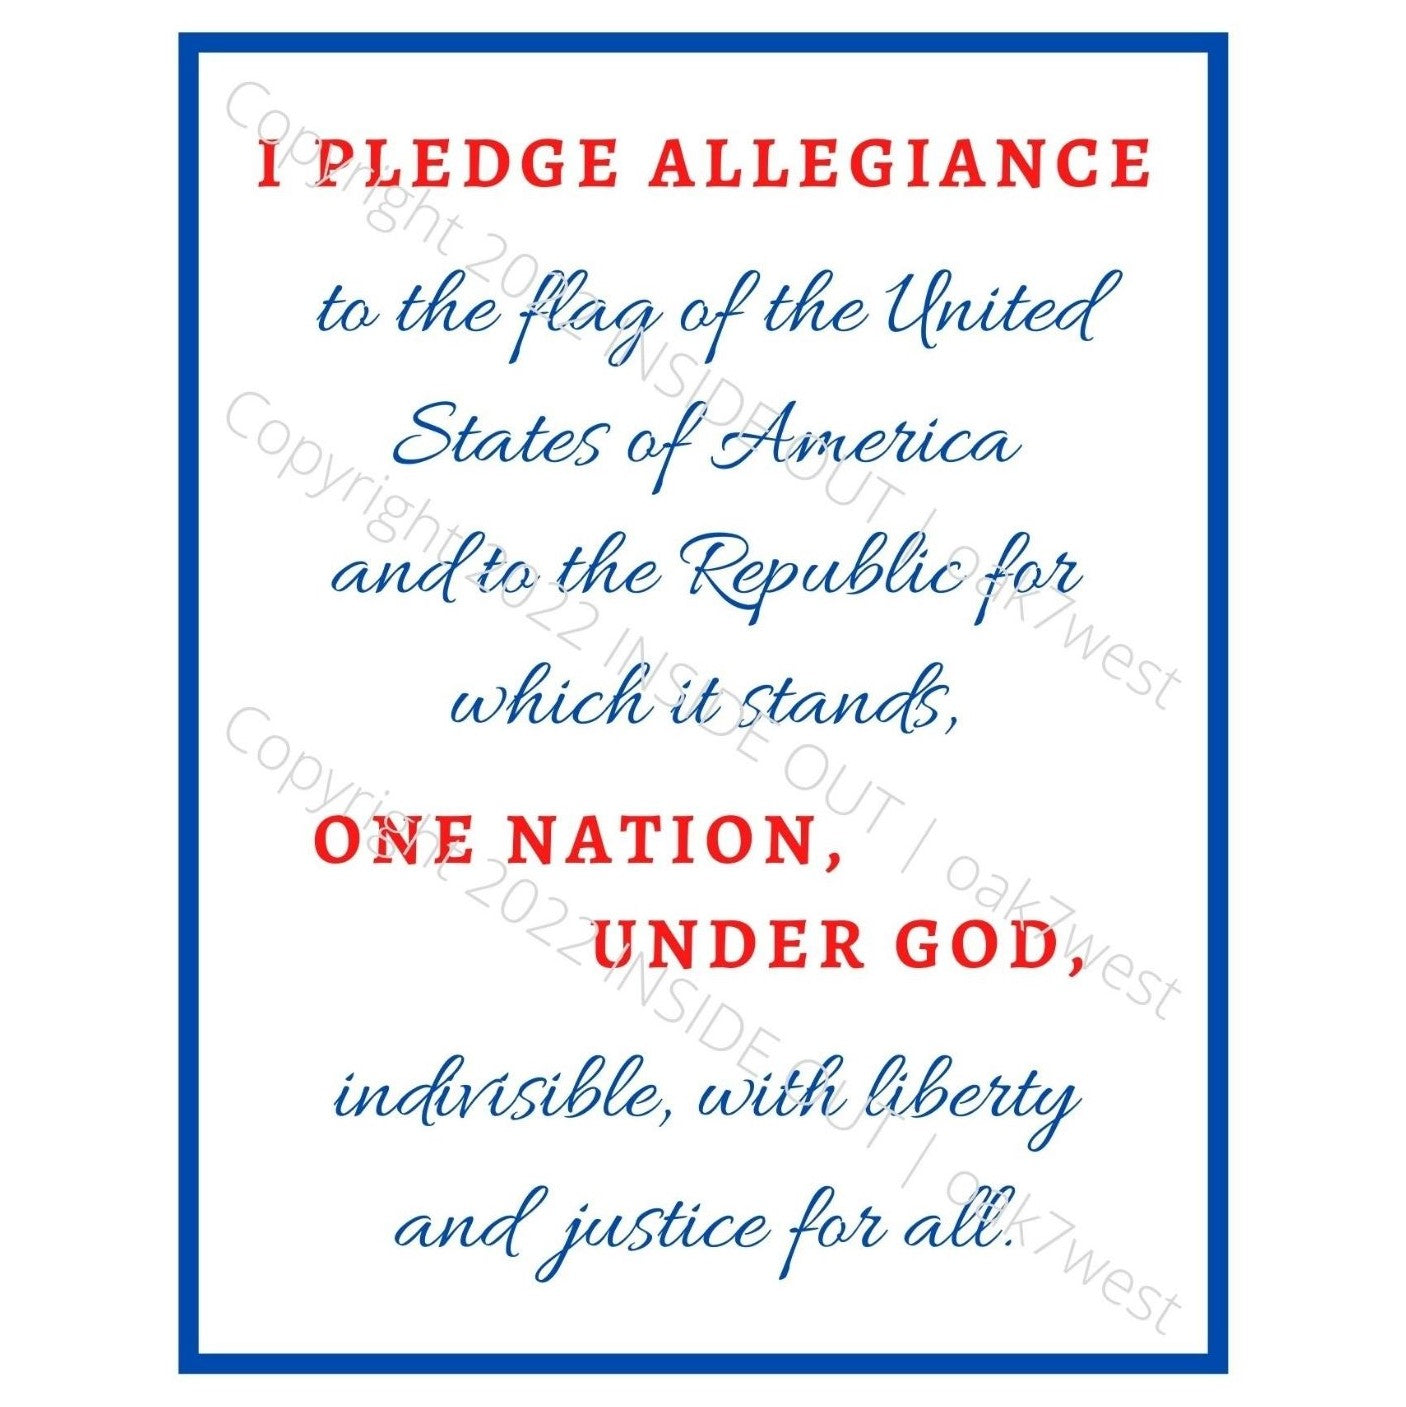 Patriotic Word Art - Pledge of Allegiance (8x10 print) | The Pledge of Allegiance Word Art Reads... I PLEDGE ALLEGIANCE to the flag of the United States of America and to the Republic for which it stands, ONE NATION, UNDER GOD, indivisible, with liberty and justice for all. | Shown in Color (Red, White, & Blue) with Blue Border | oak7west.com